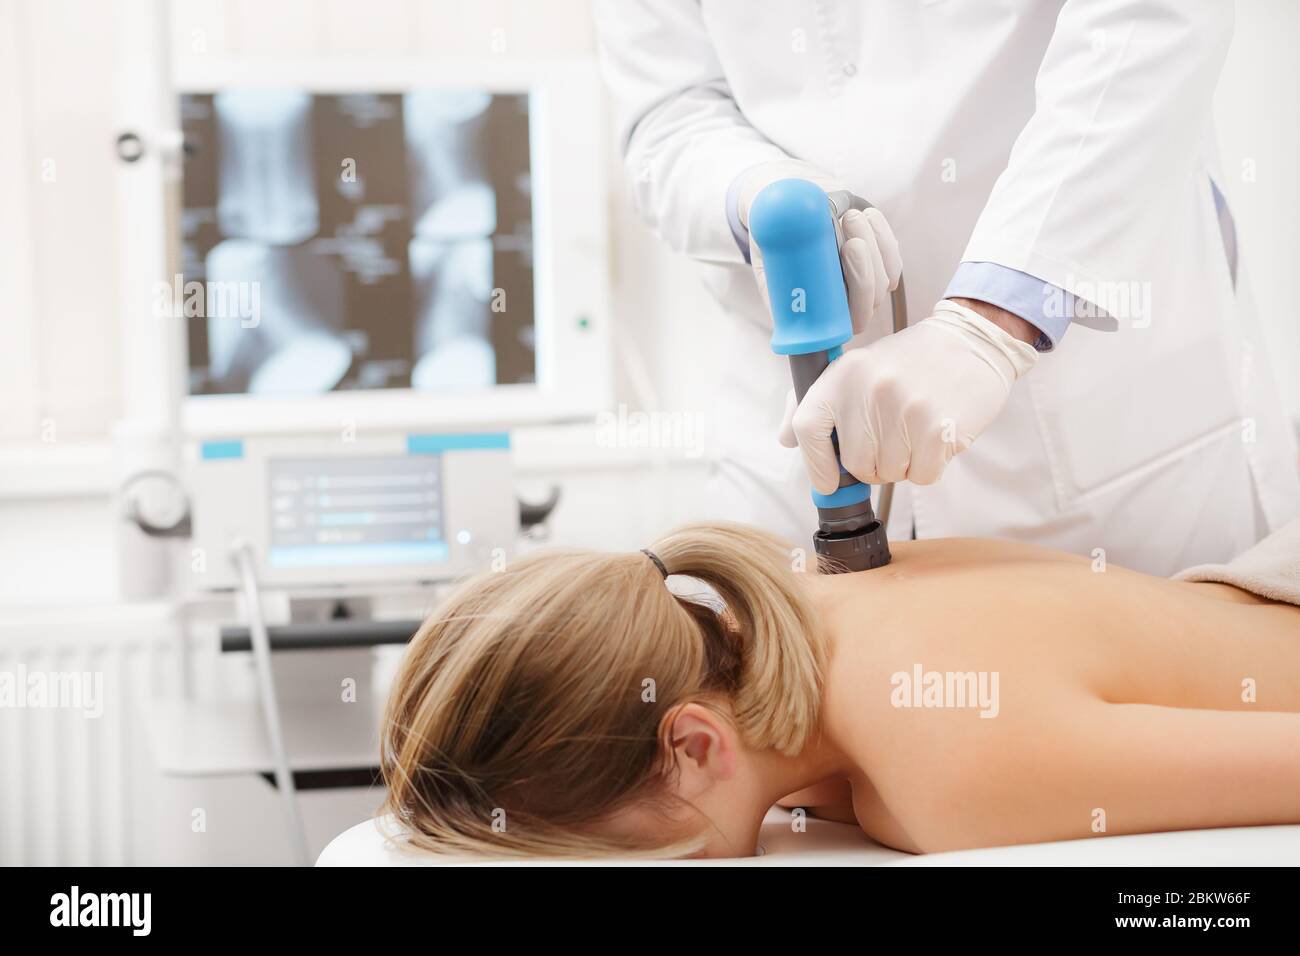 https://c8.alamy.com/comp/2BKW66F/extracorporeal-shockwave-therapy-eswtnon-surgical-treatmentphysical-therapy-for-neck-and-back-musclesspine-with-shock-wavespain-relief-2BKW66F.jpg